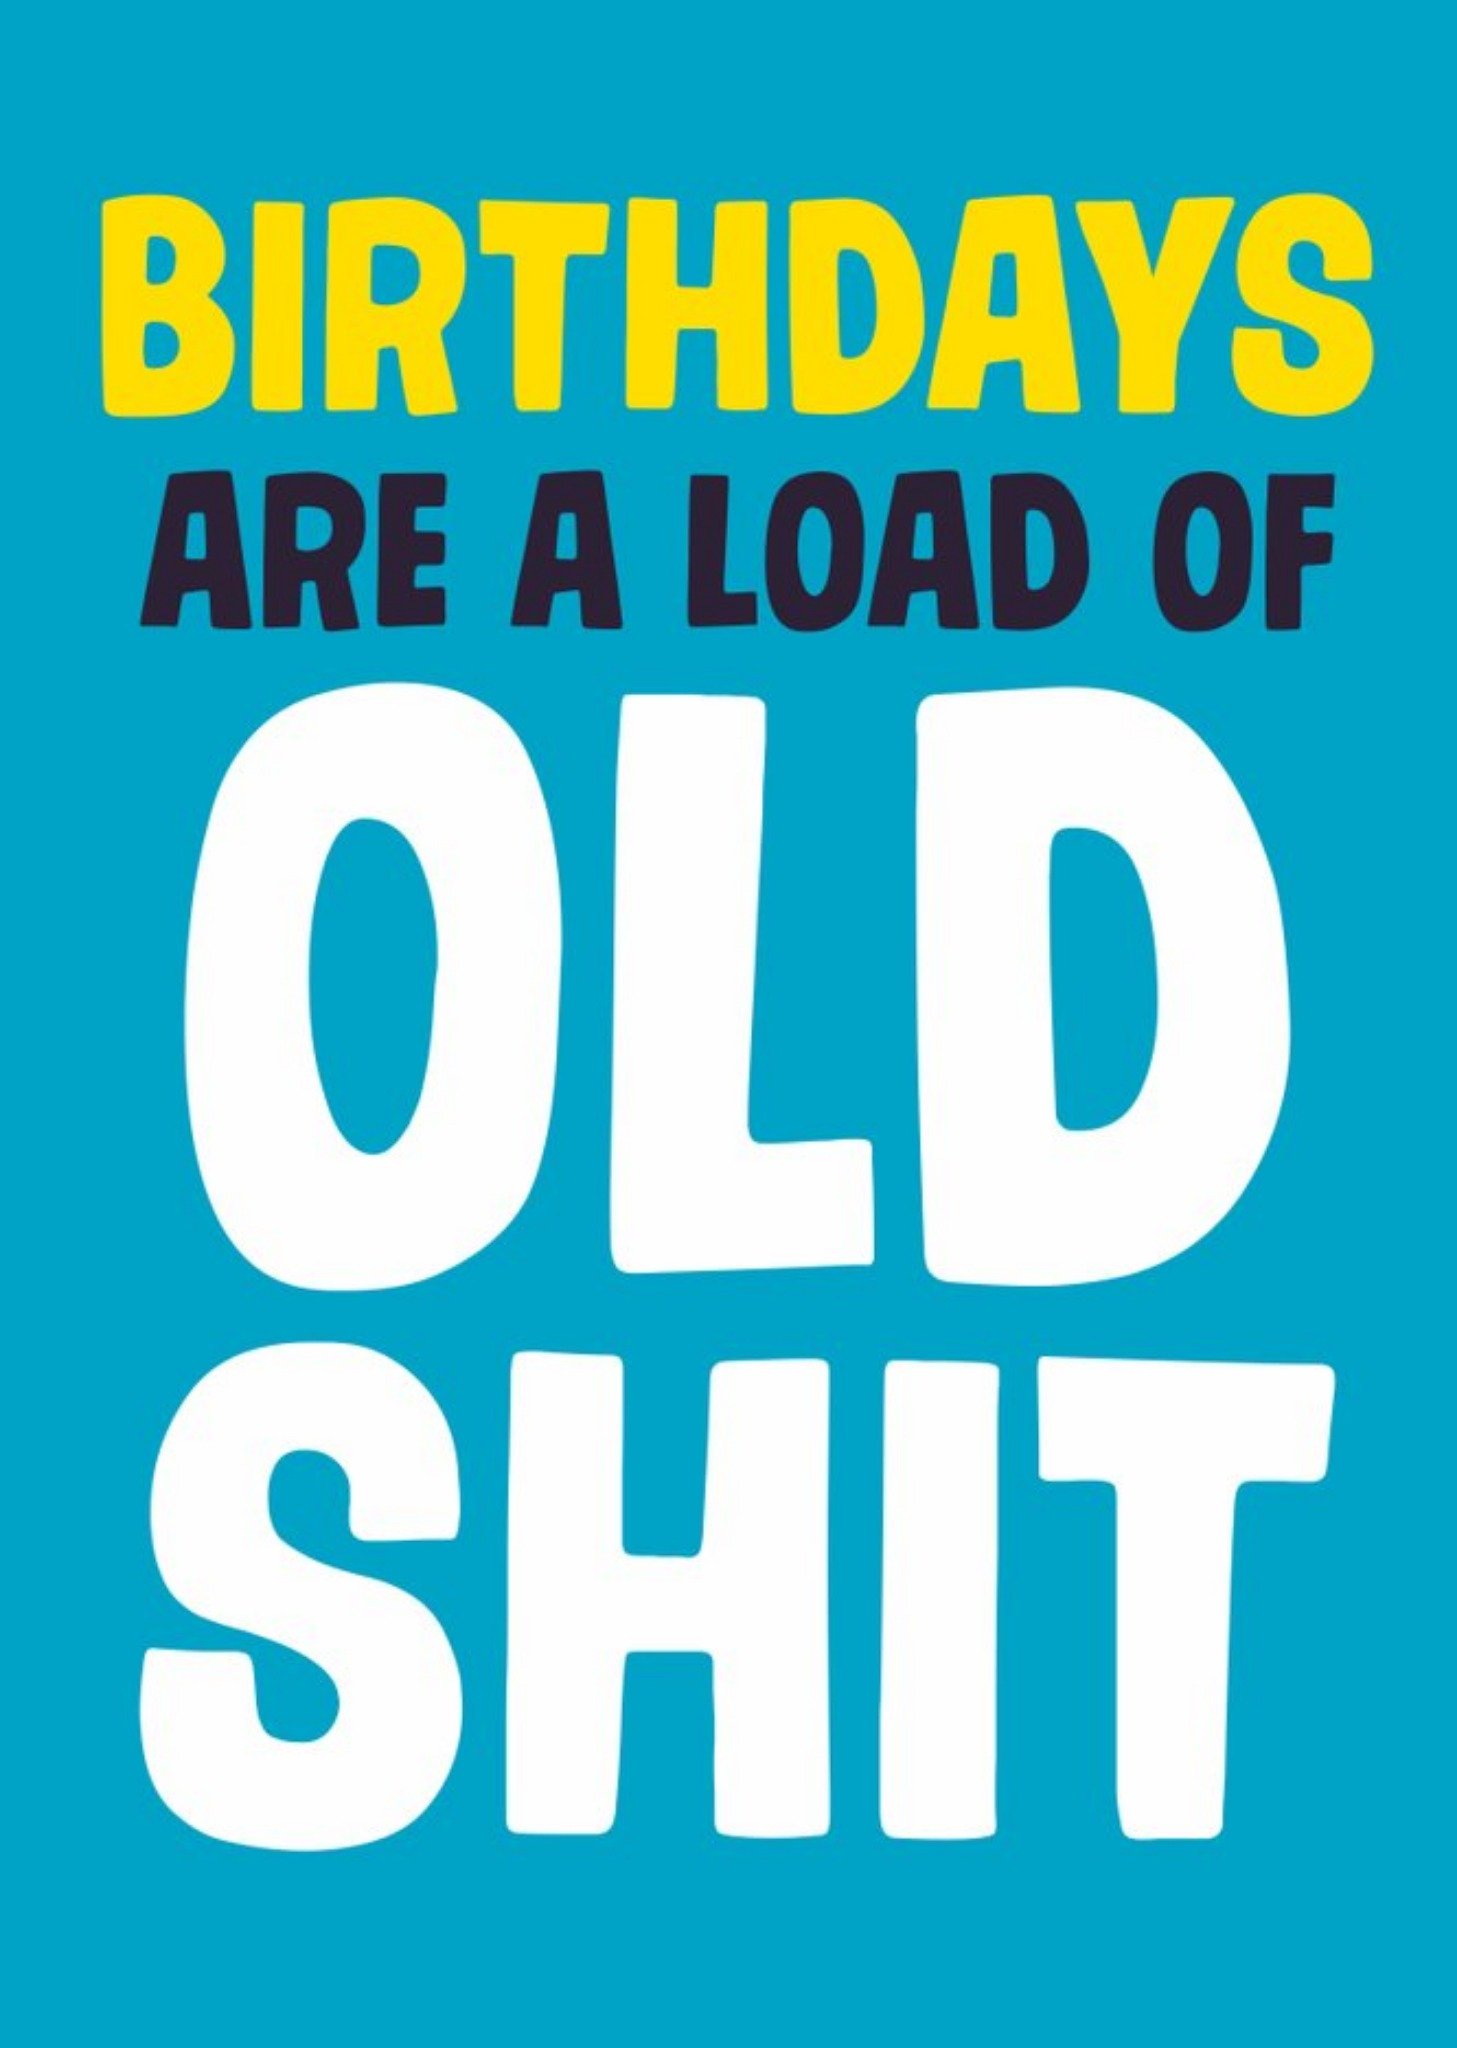 Moonpig Dean Morris Birthdays Are A Load Of Old Shit Funny Birthday Card, Large